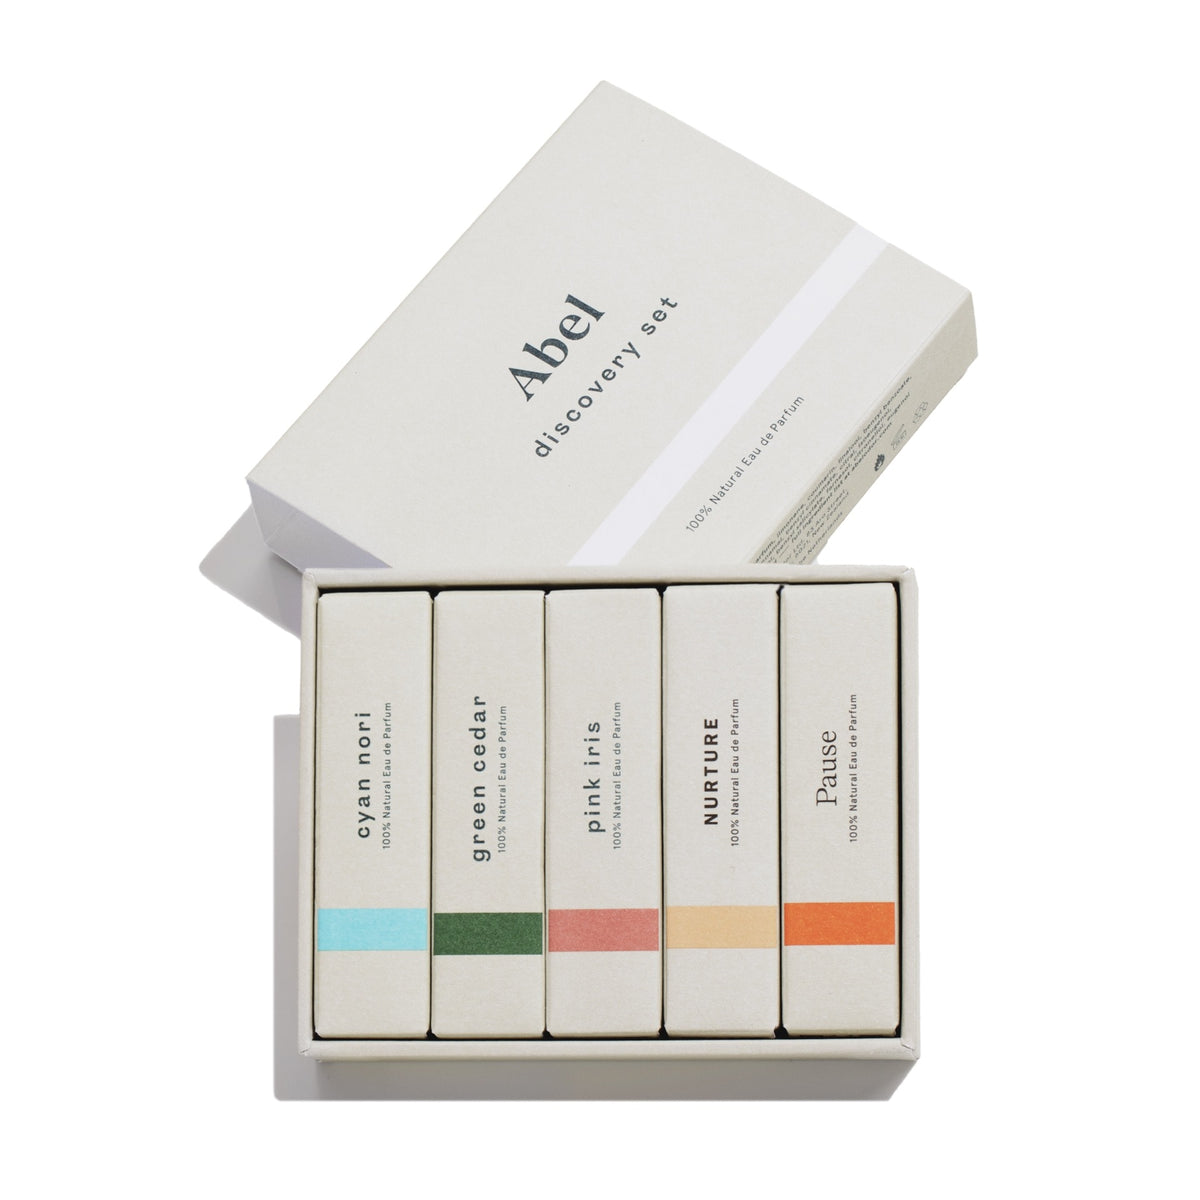 An Abel Discovery Set – 5 most popular scents presentation box of 100% natural soaps in a variety of fragrances.